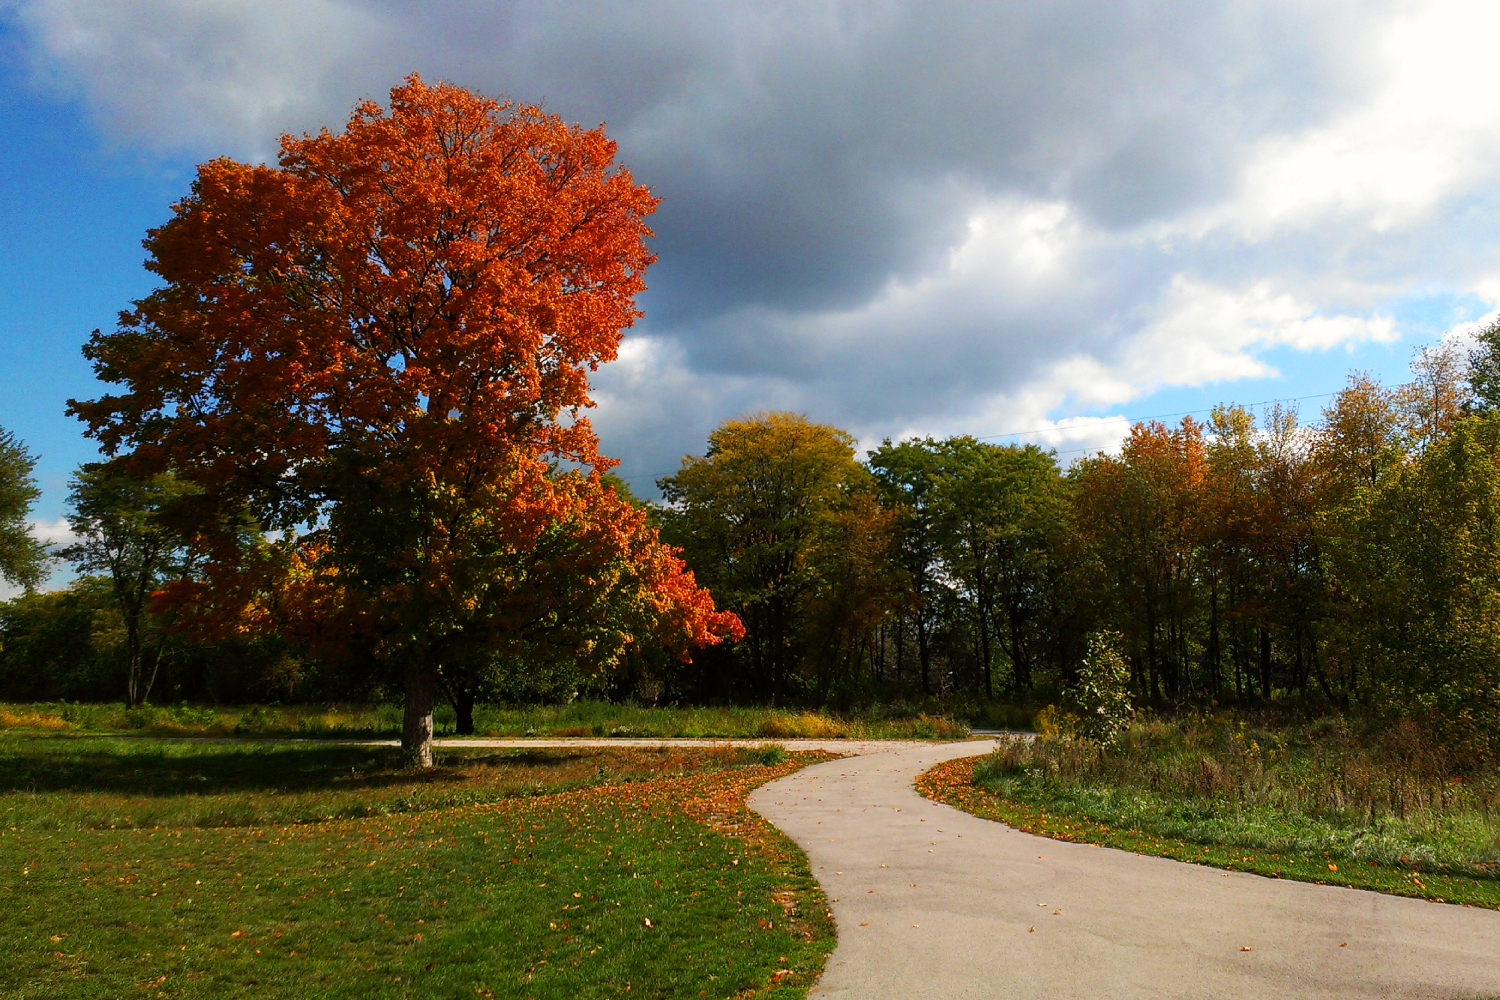 Autumn scenery along the trail at Riverview Farmstead Preserve.